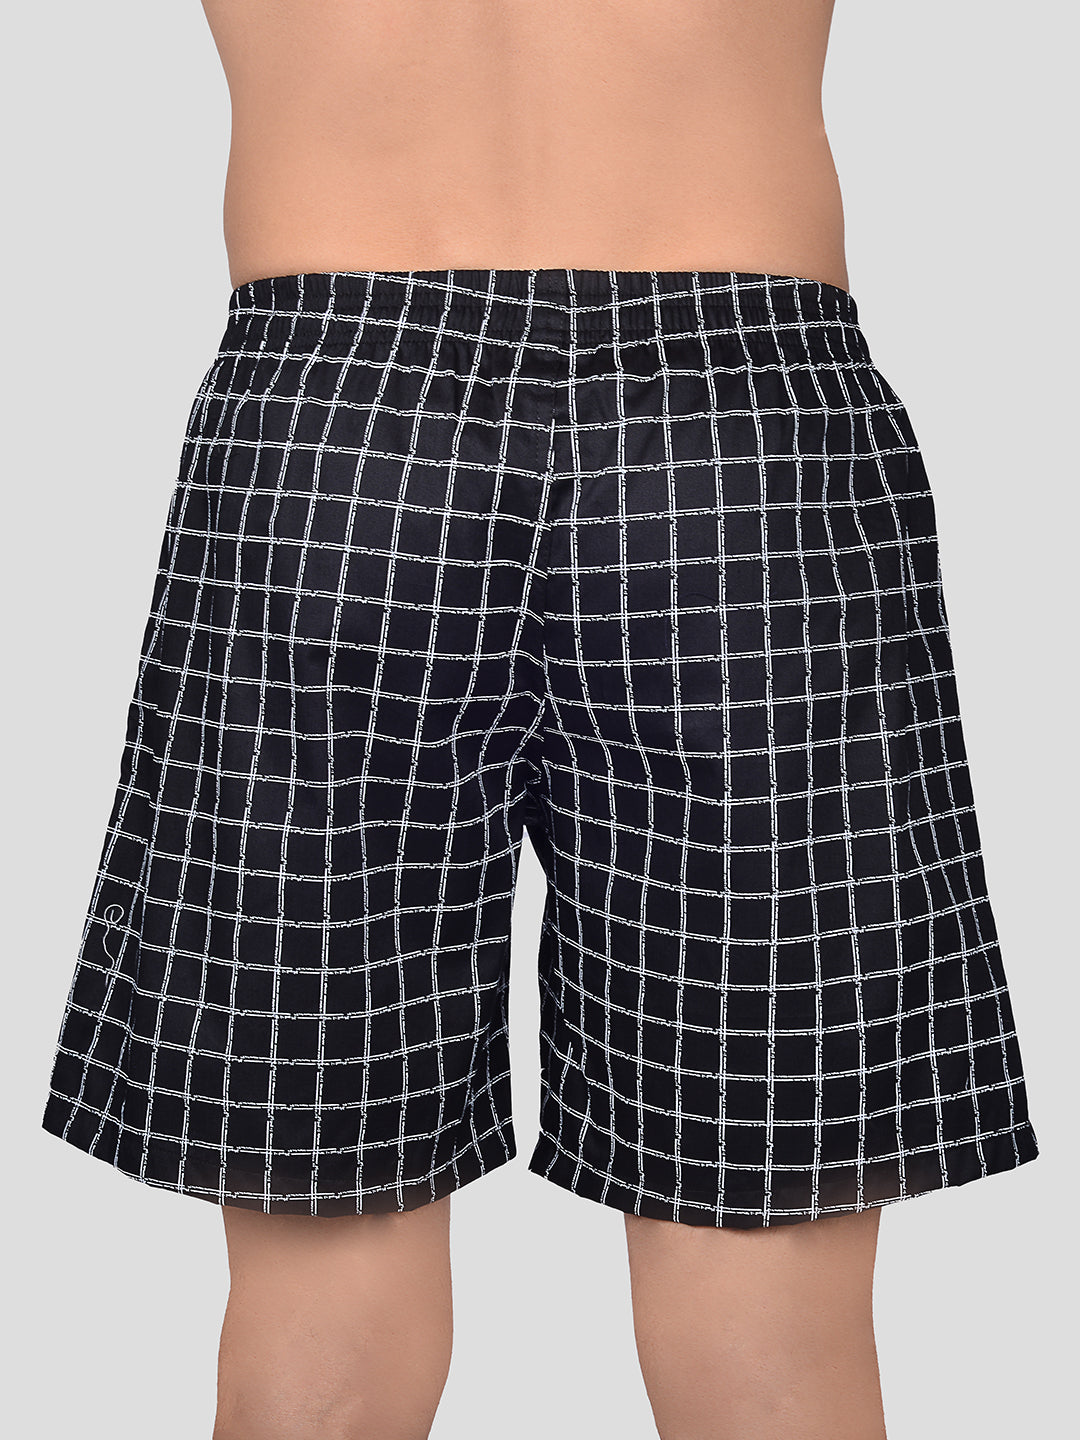 Frenchie Men's Boxer Printed Shorts BC (Assorted)